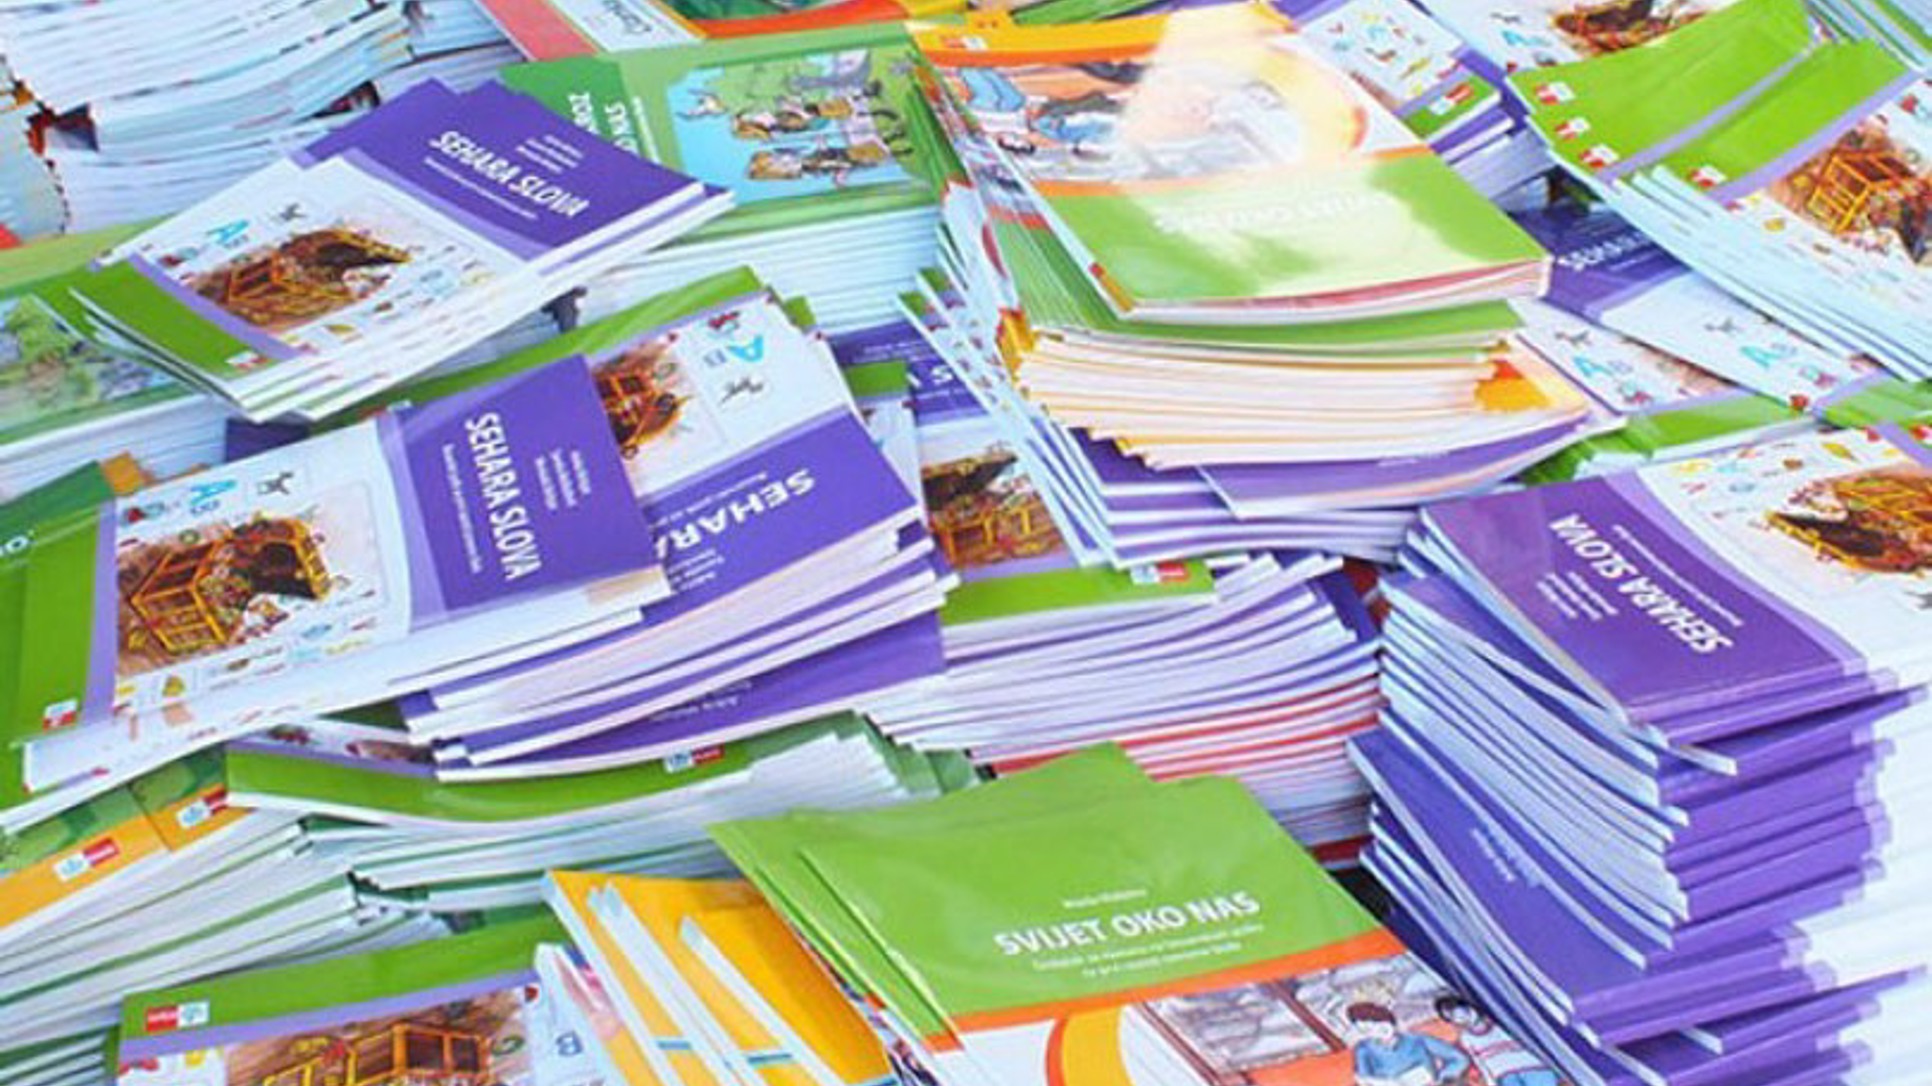 Millions for unusable textbooks again this year